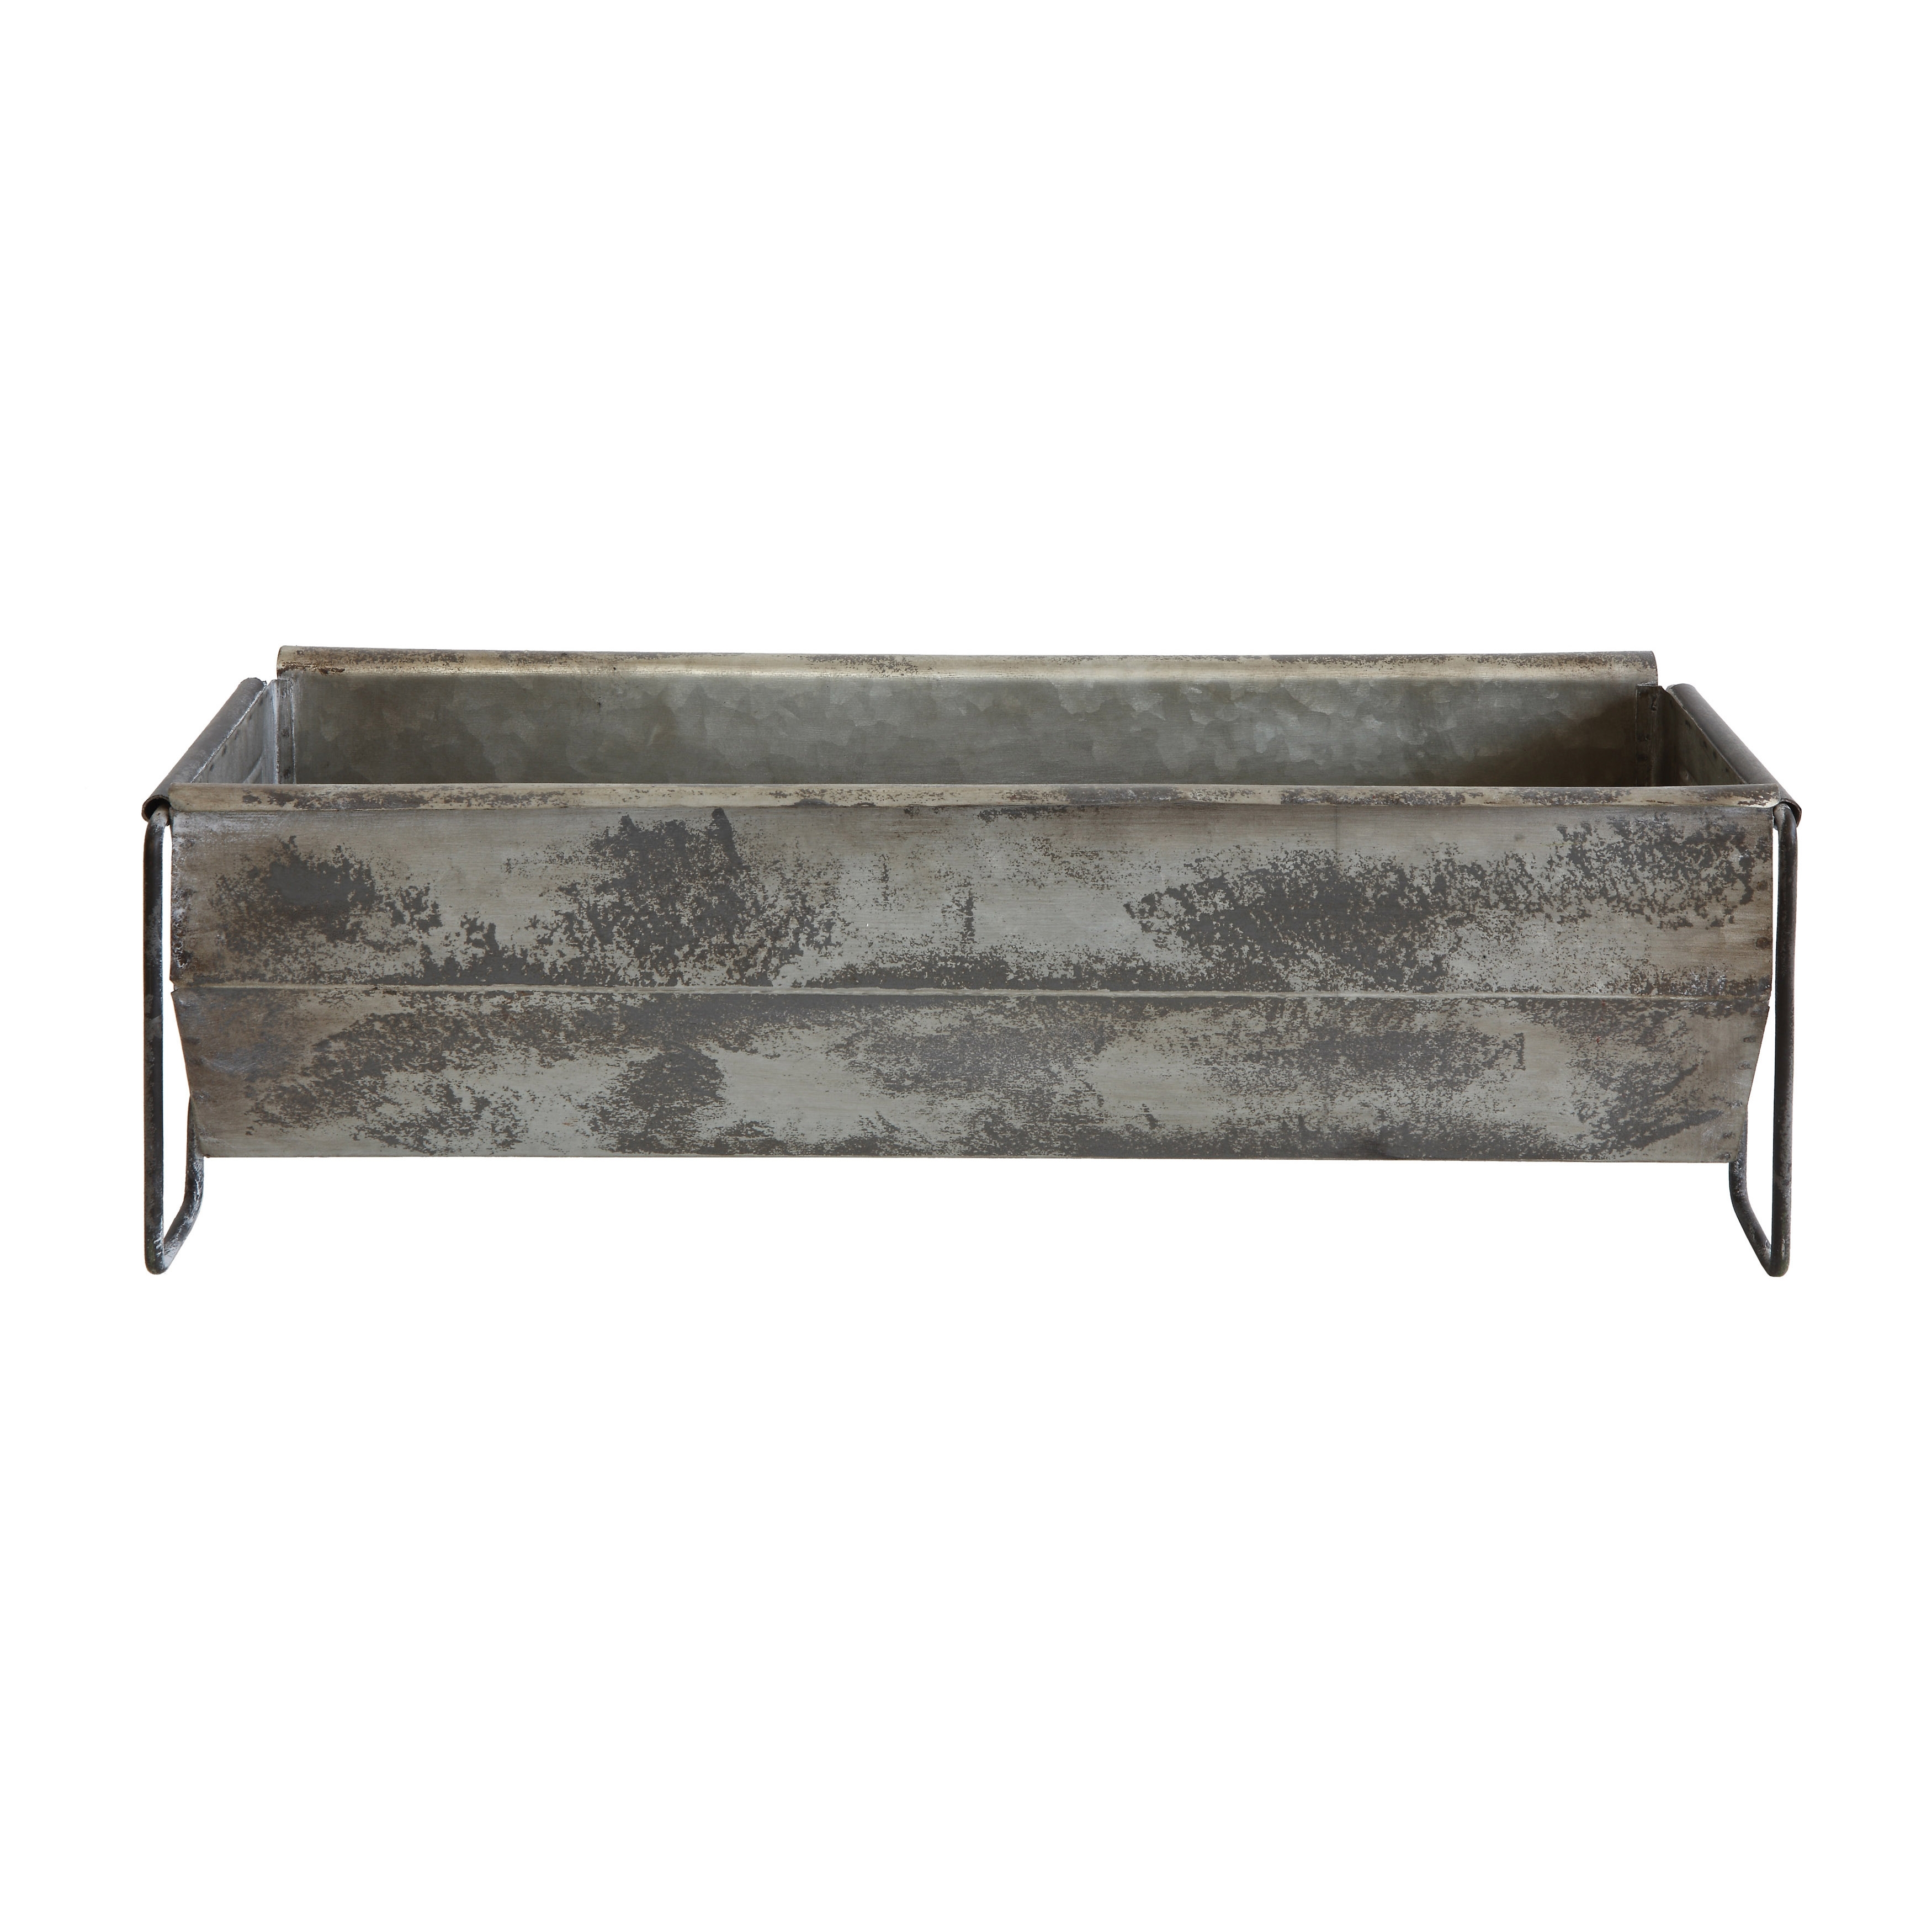 Metal Trough Container with Distressed Zinc Finish - Image 0